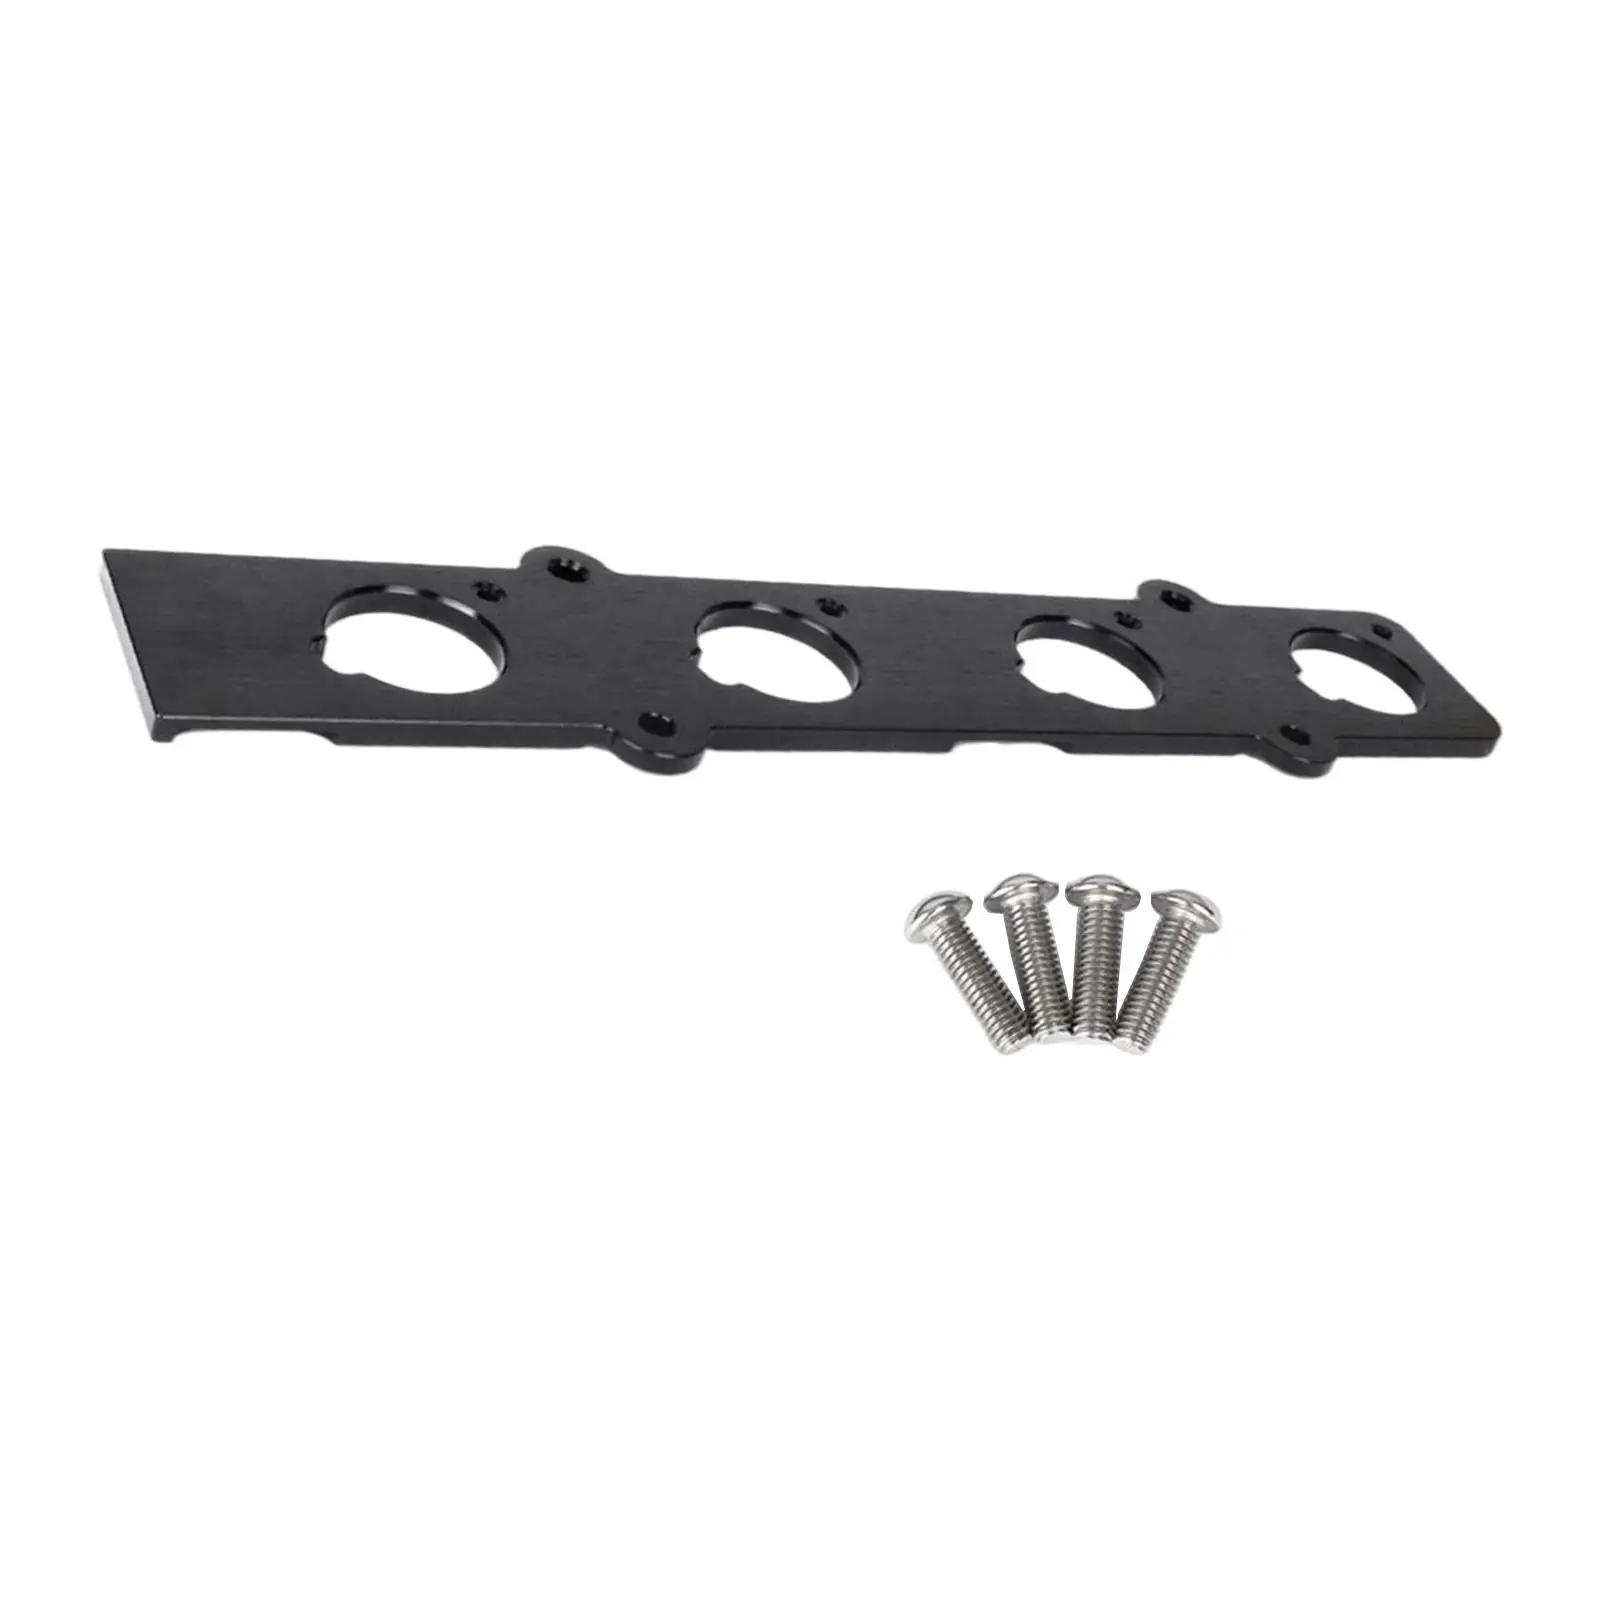 B-Series   Coil Adapter Plate, Conversion Adapters, on Plug  Conversion, Coil Adapter Automotive ,  B16